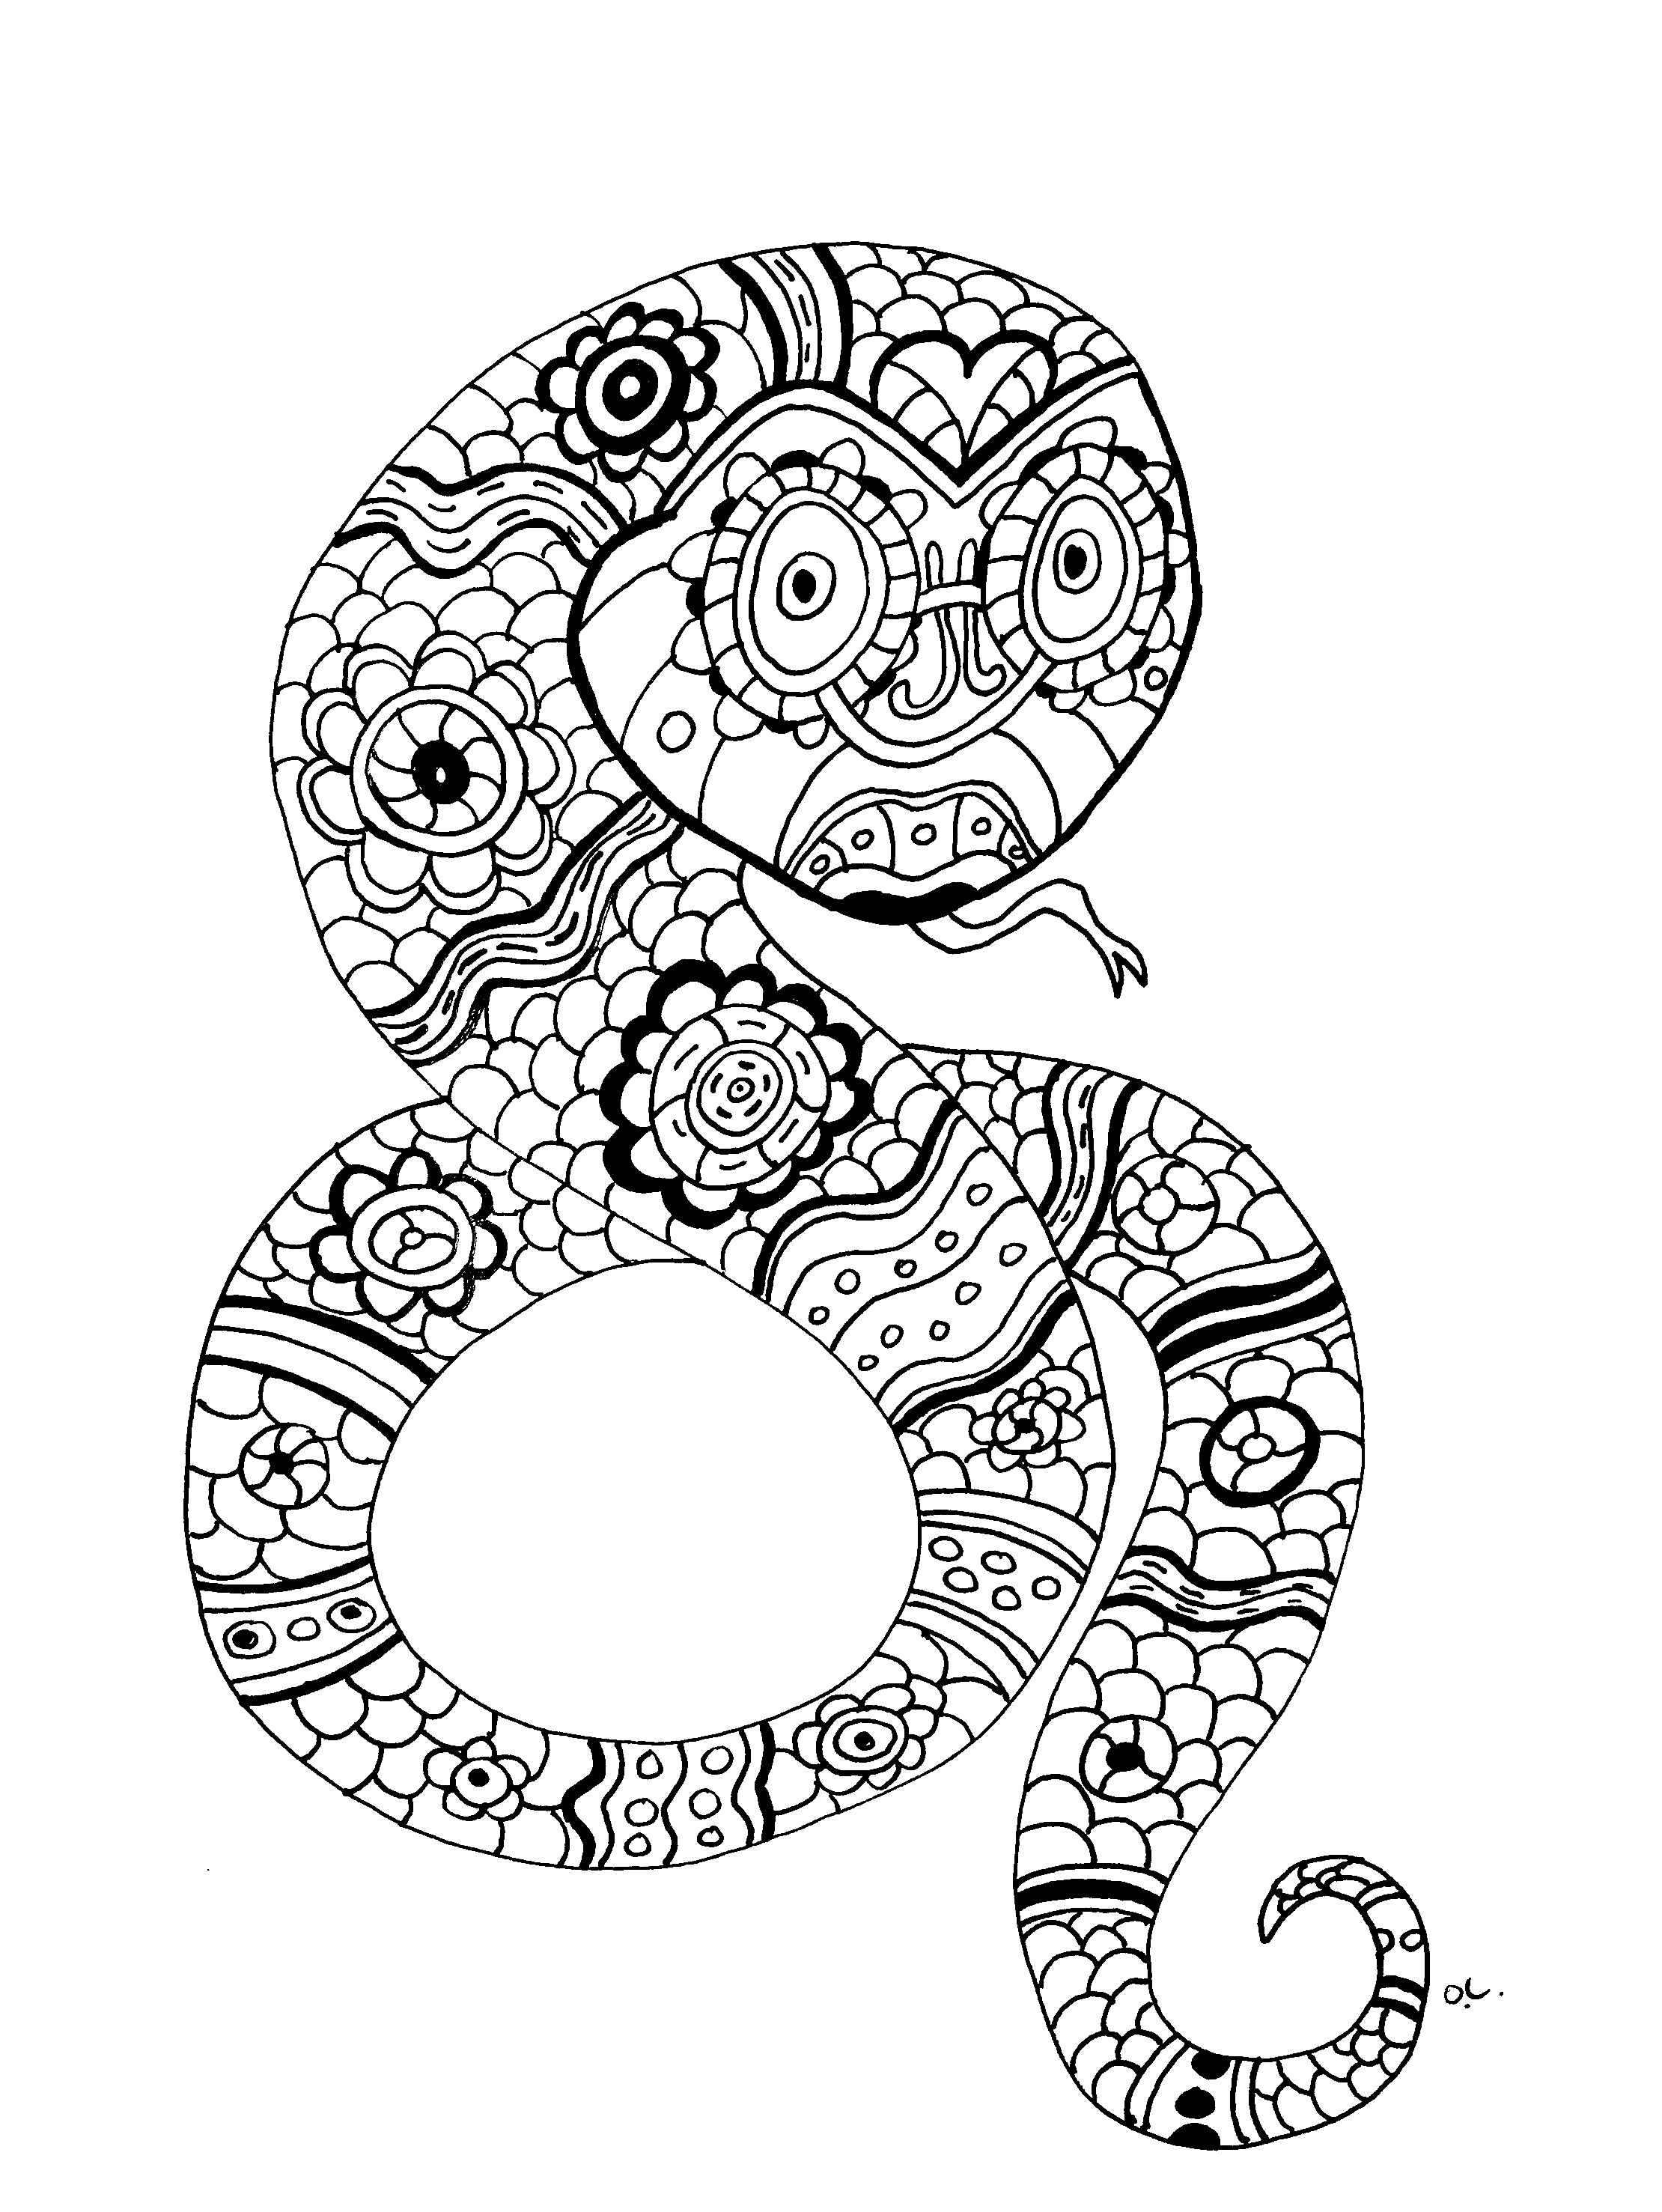 The snake by oliv - Snakes Adult Coloring Pages